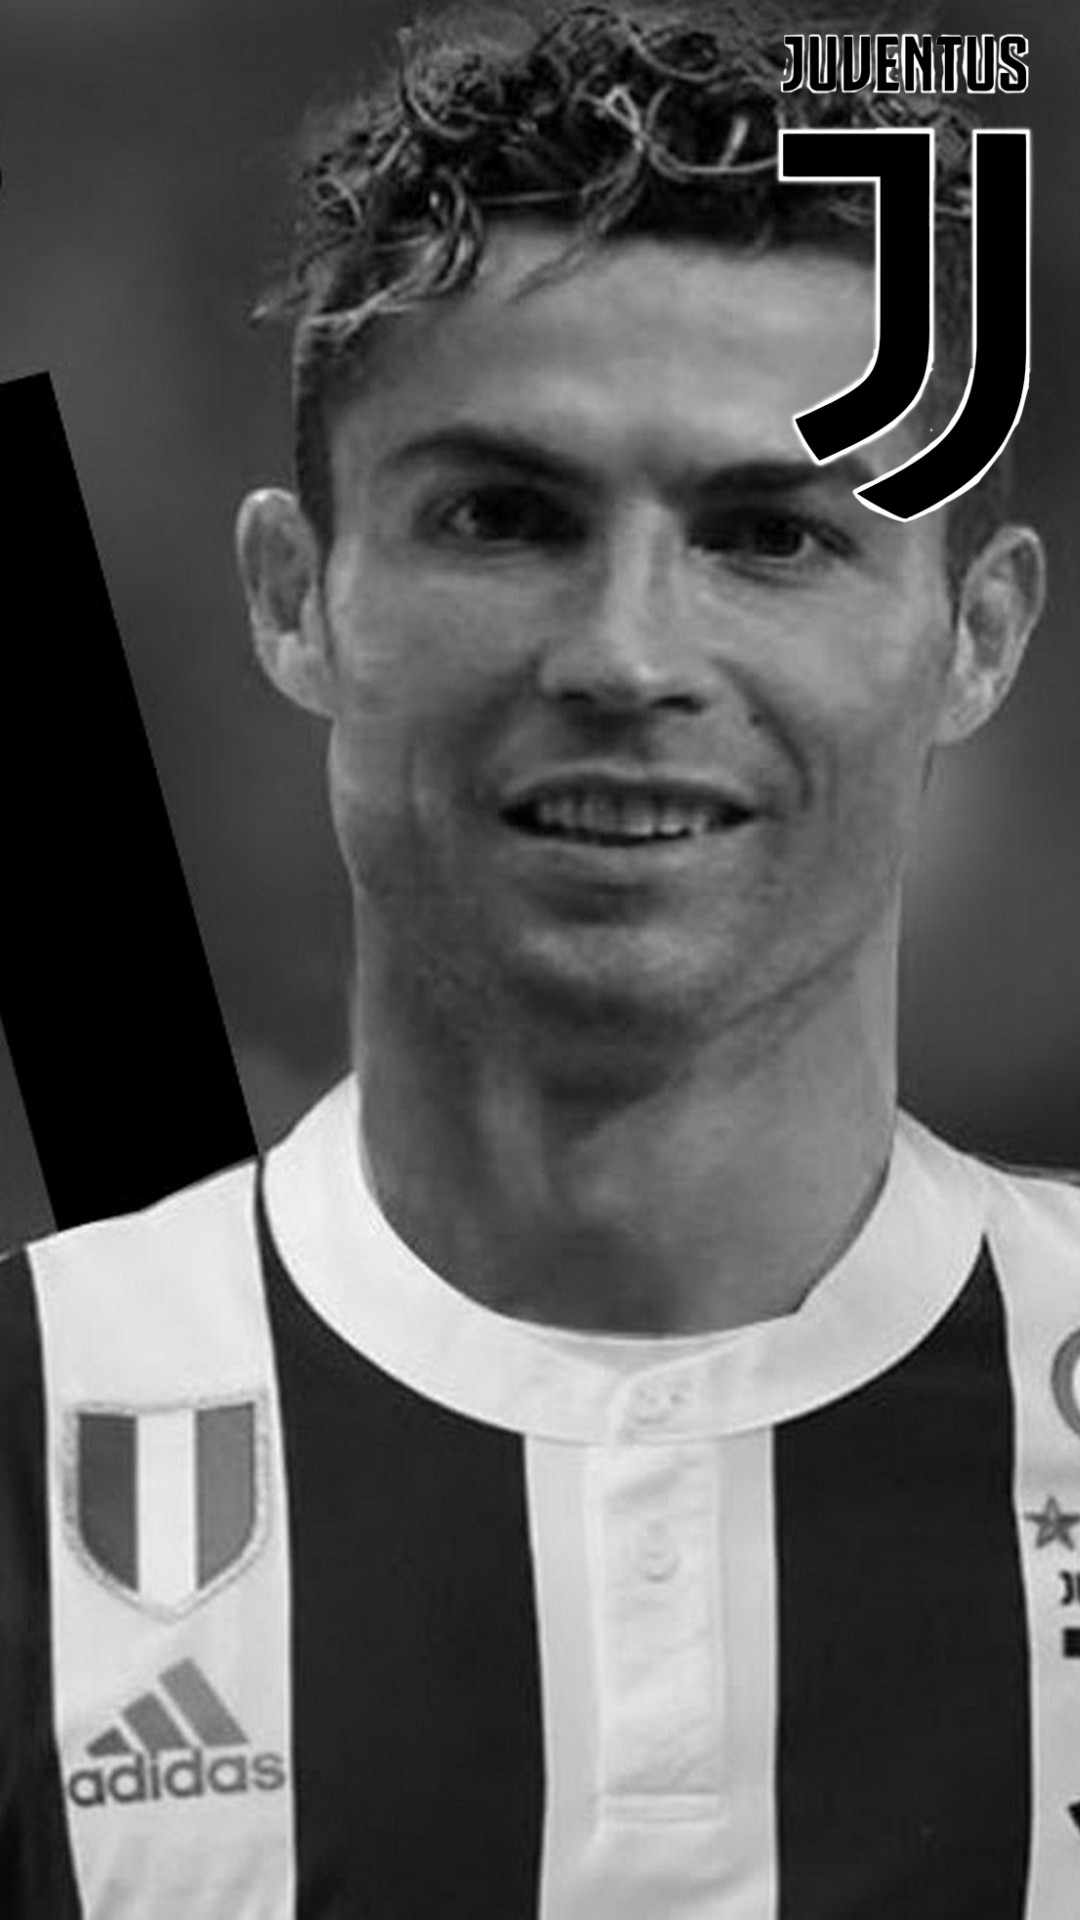 Cristiano Ronaldo Juventus iPhone Wallpapers With Resolution 1080X1920 pixel. You can make this wallpaper for your Mac or Windows Desktop Background, iPhone, Android or Tablet and another Smartphone device for free